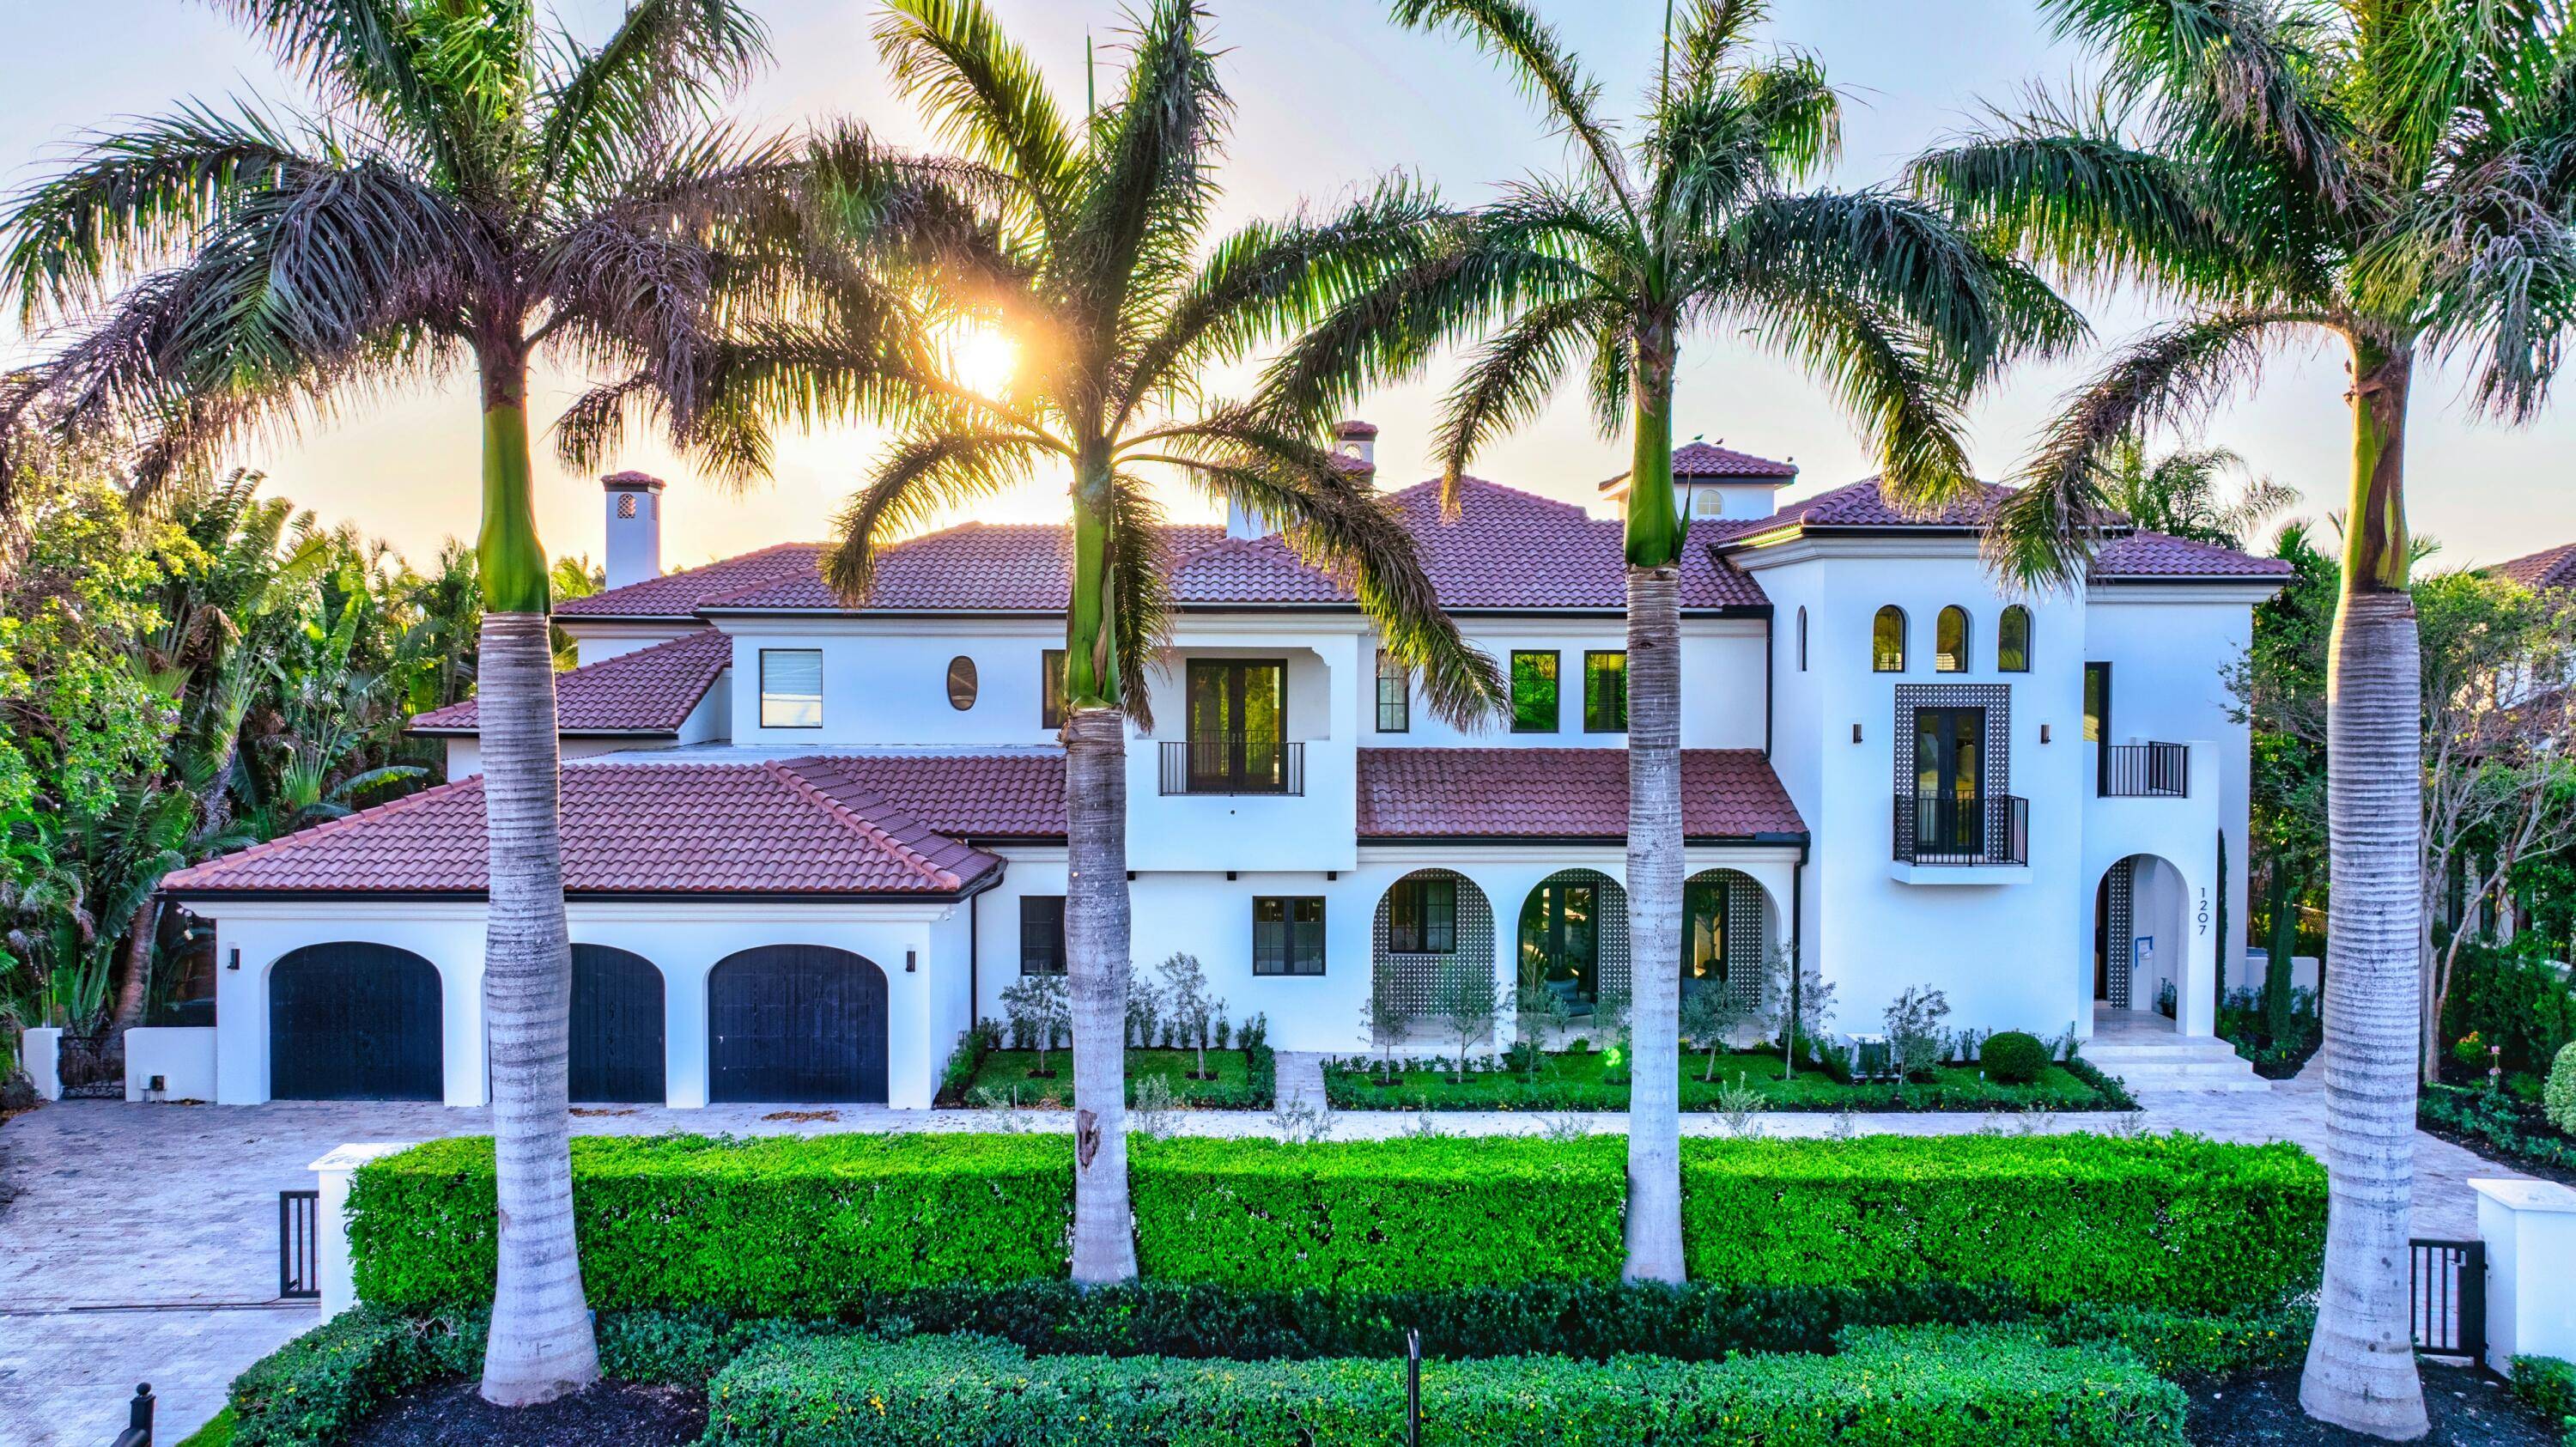 Ideally situated just blocks from the beach in Boca Raton's prestigious Estates Section, this newly remastered intracoastal estate marries California chic with classic Spanish design.